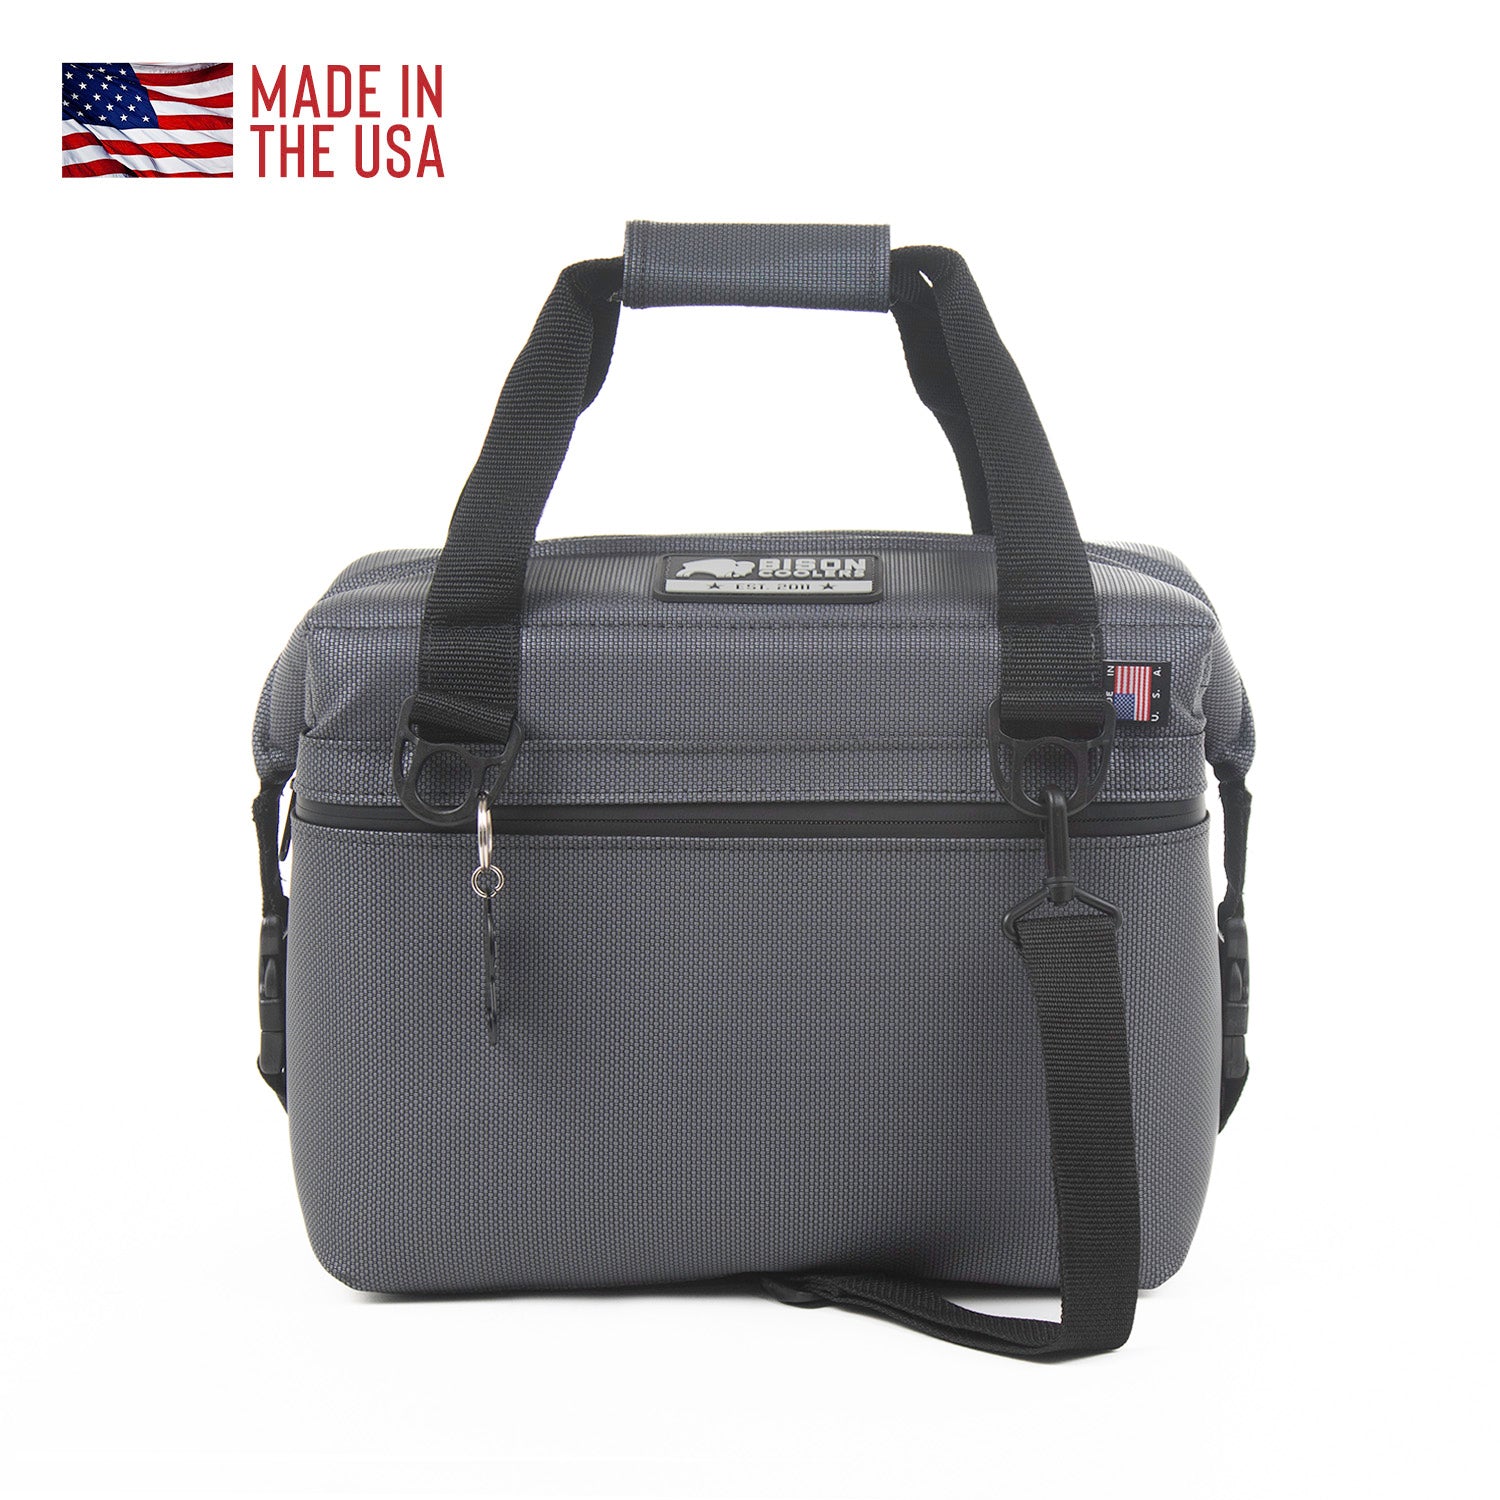 Bison 12 can XD series soft sided cooler.